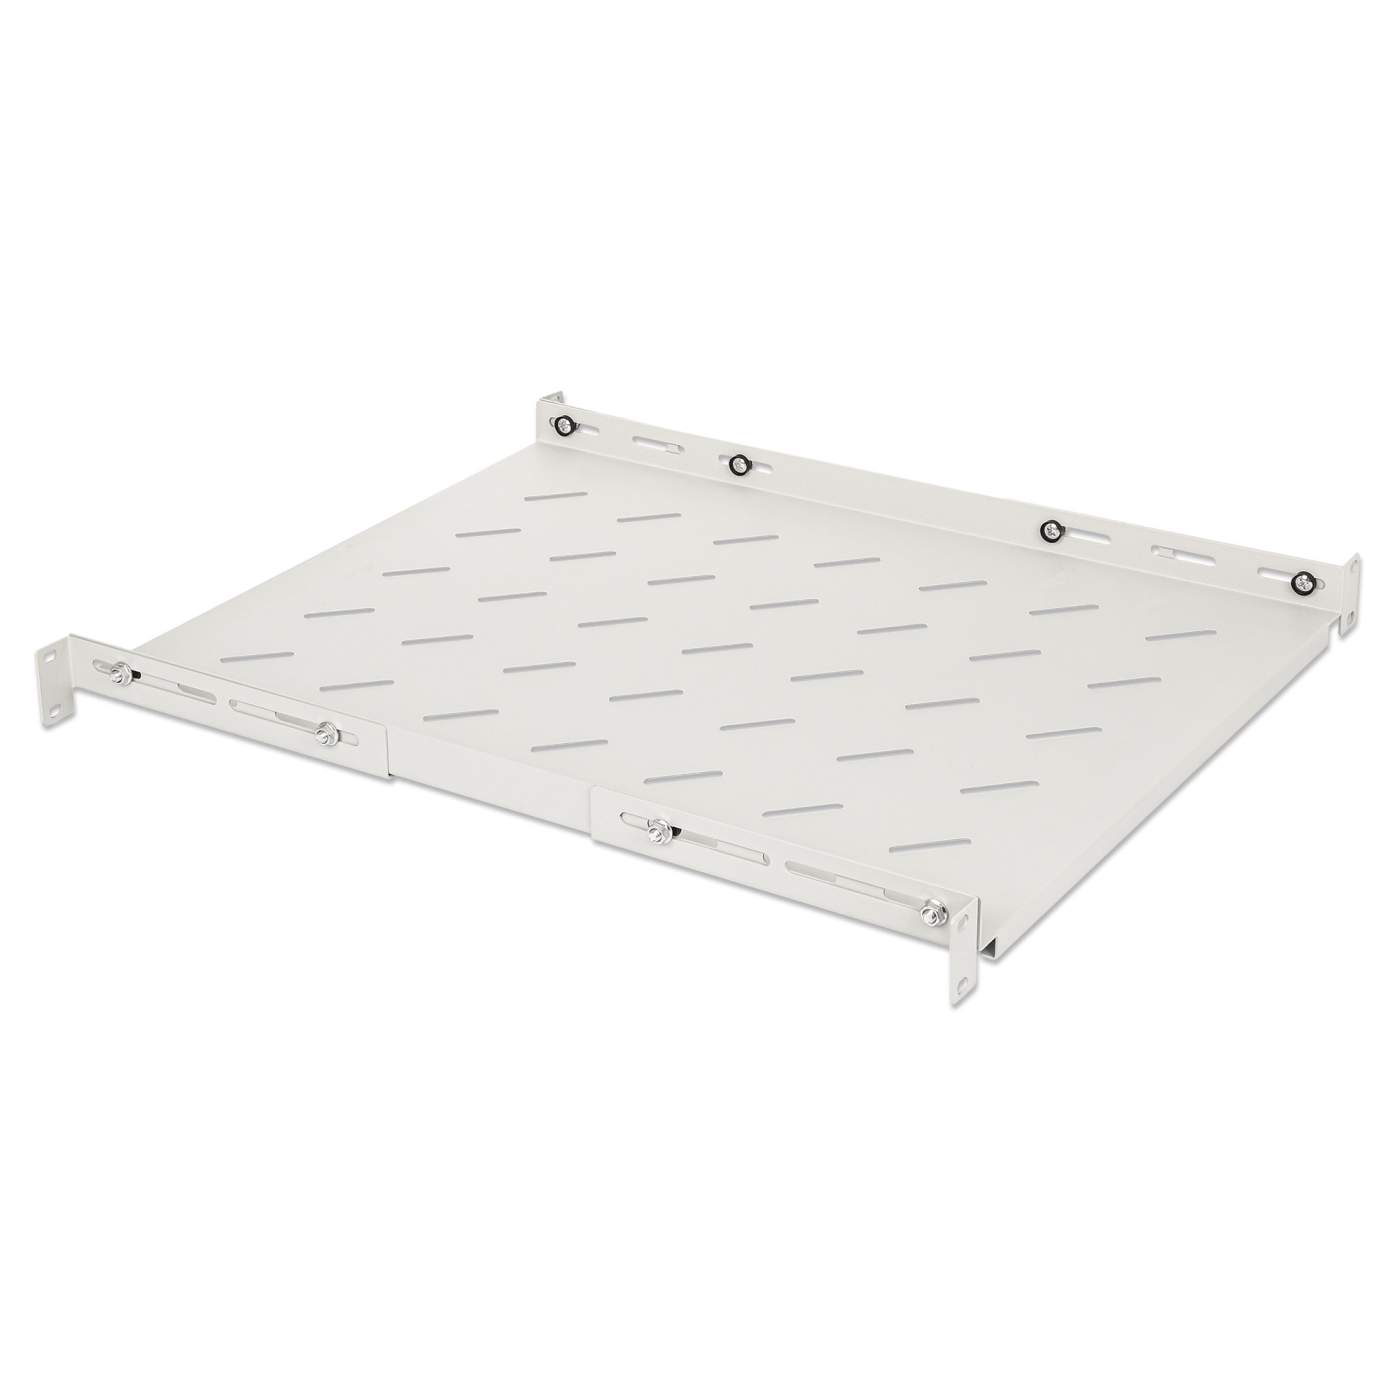 19" Shelf with Variable Rails for Fixed Mounting Image 2